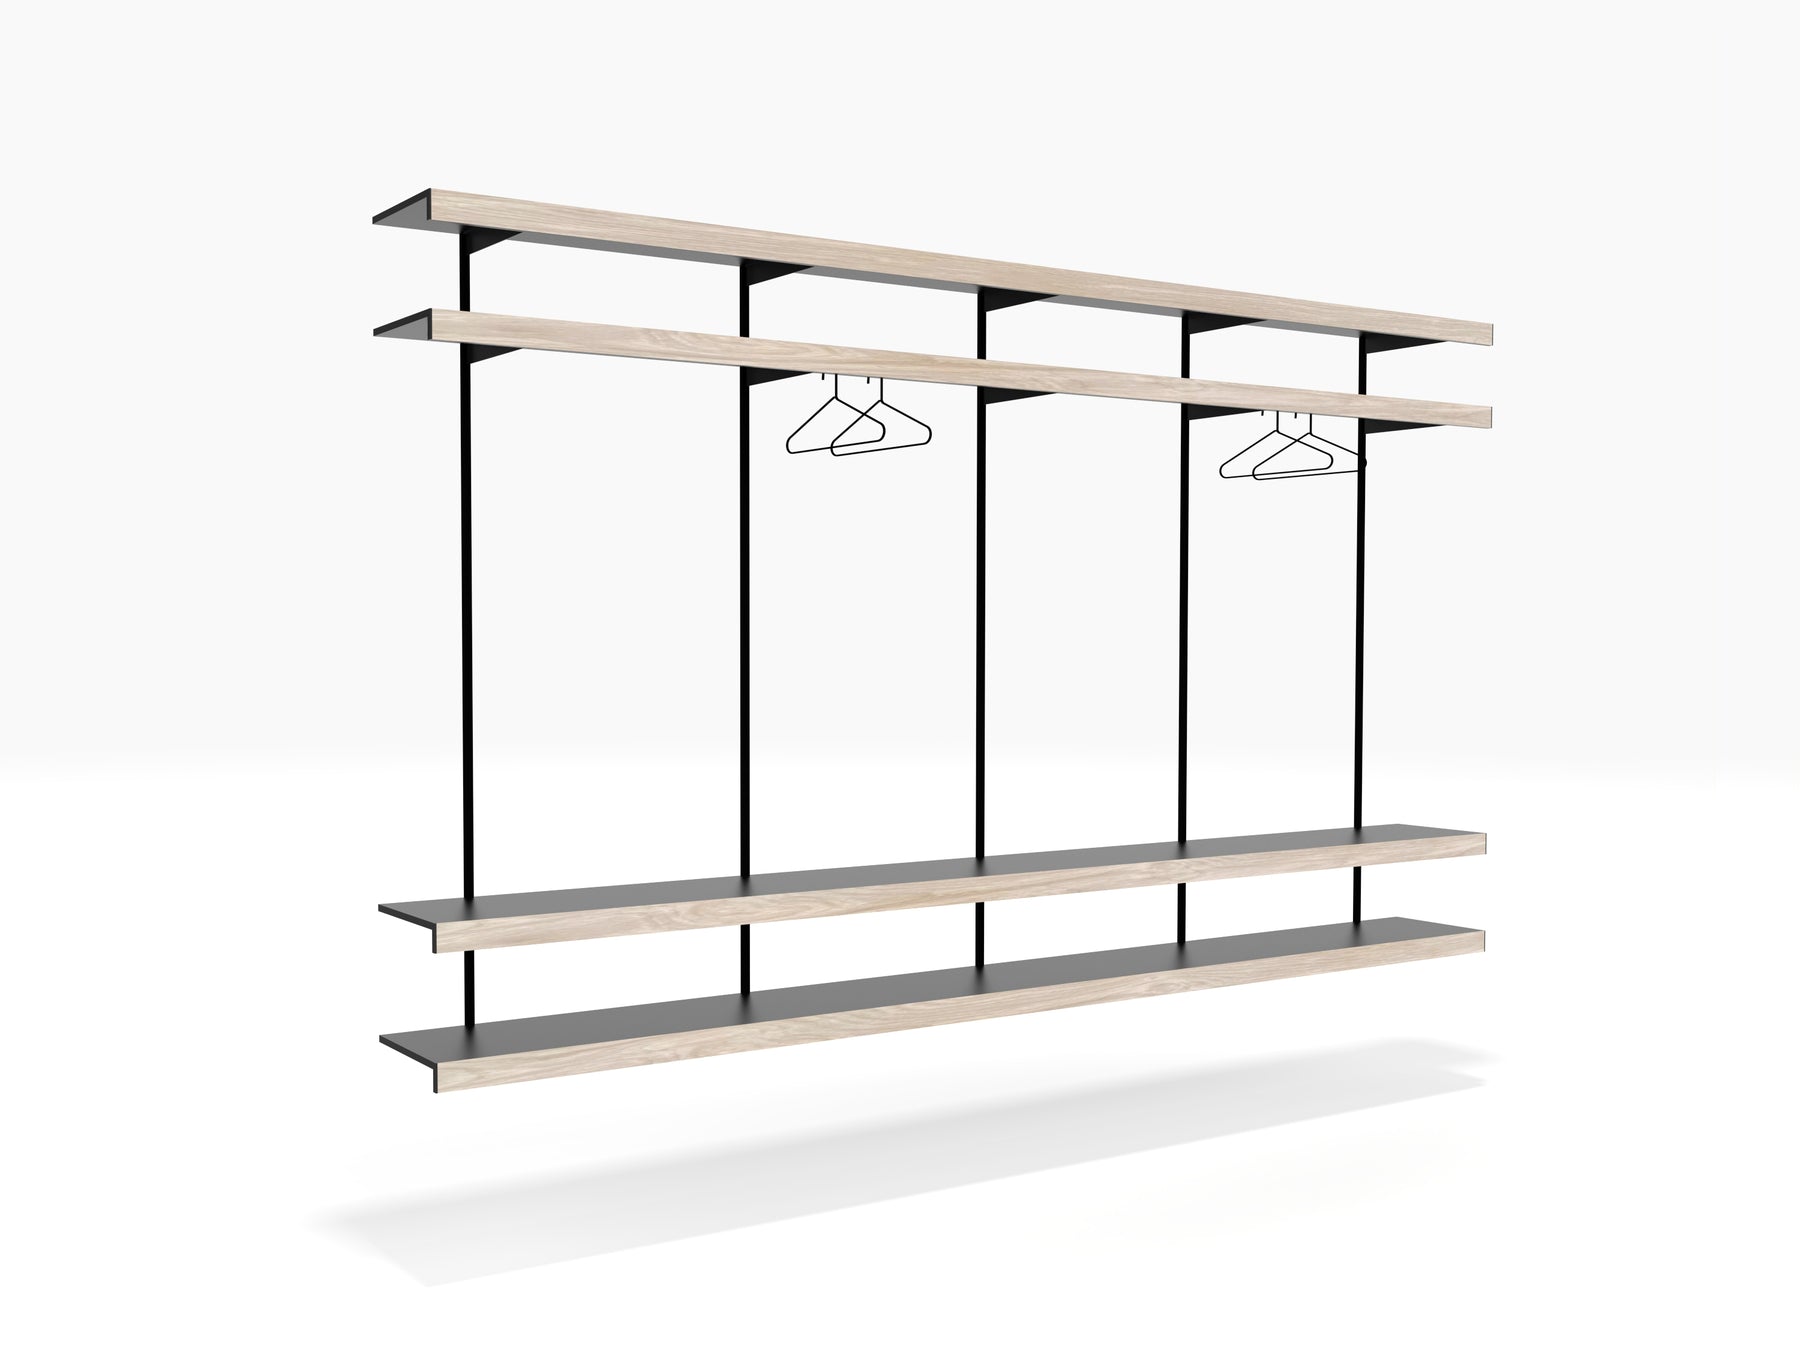 Walk-in wardrobe long wall mounted shelving with clothes storage